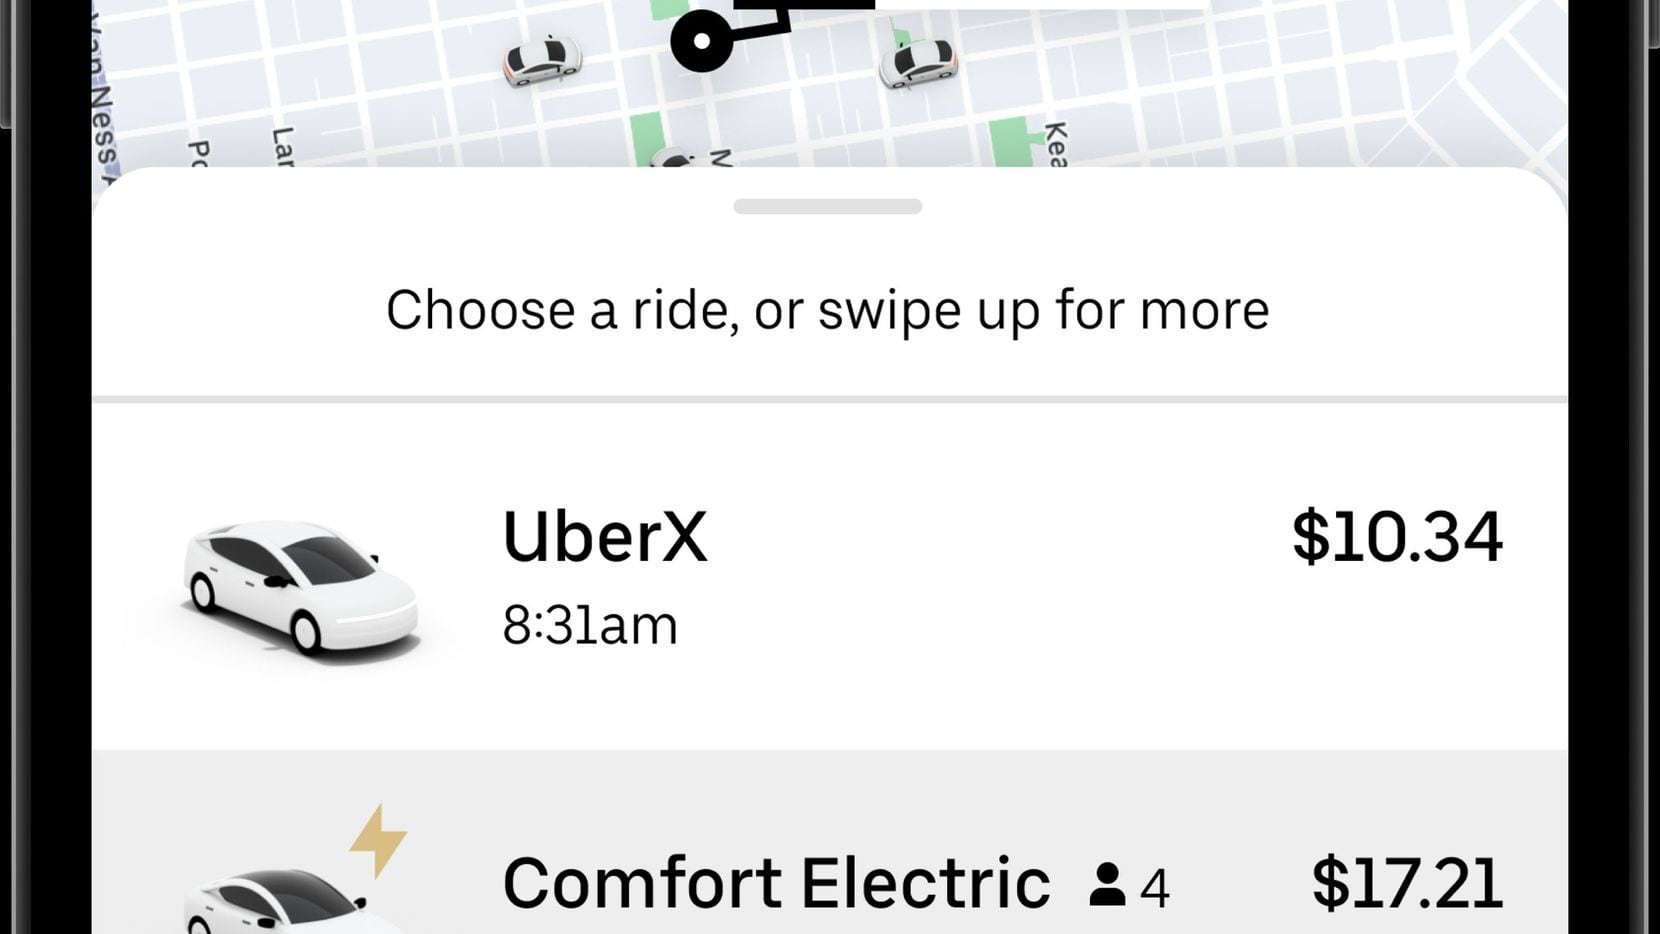 Uber Introduces Electric-Only Ride Option in Dallas